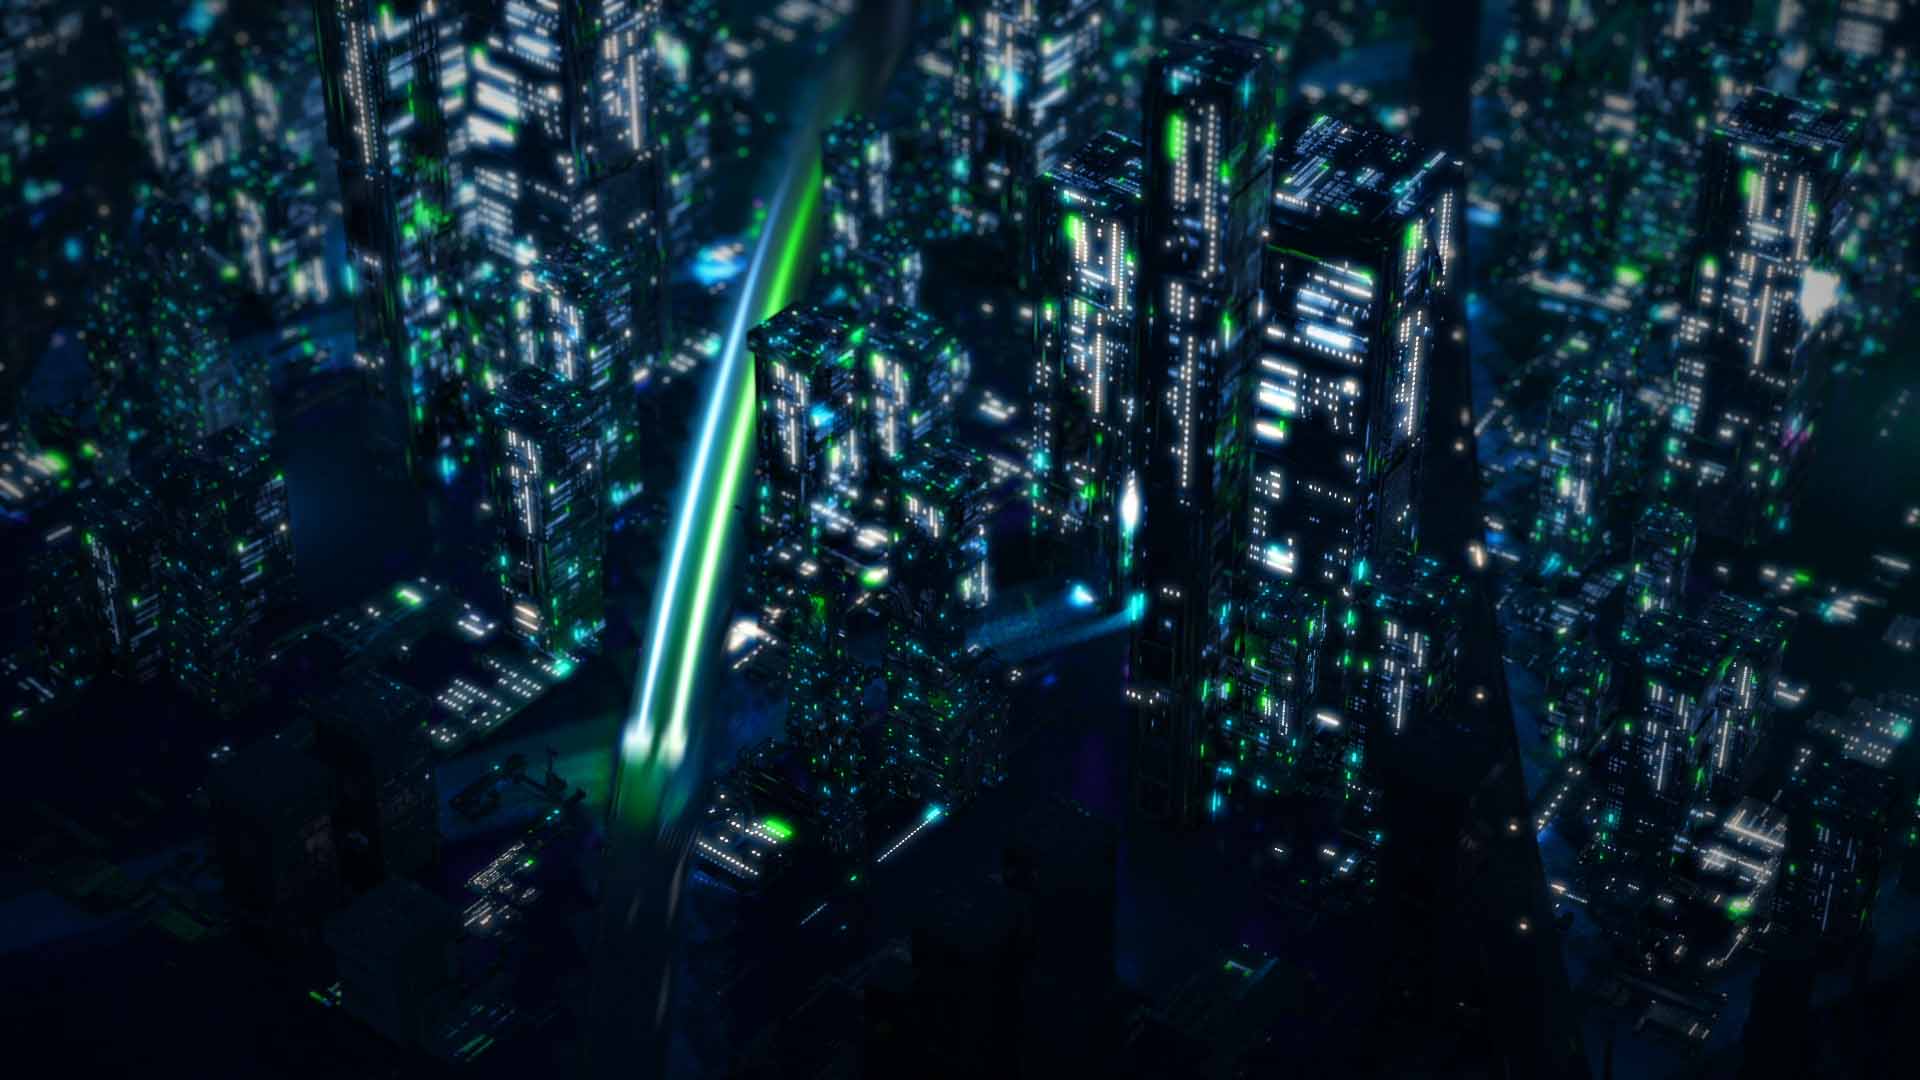 Two animated spheres with light trails fly through a futuristic city